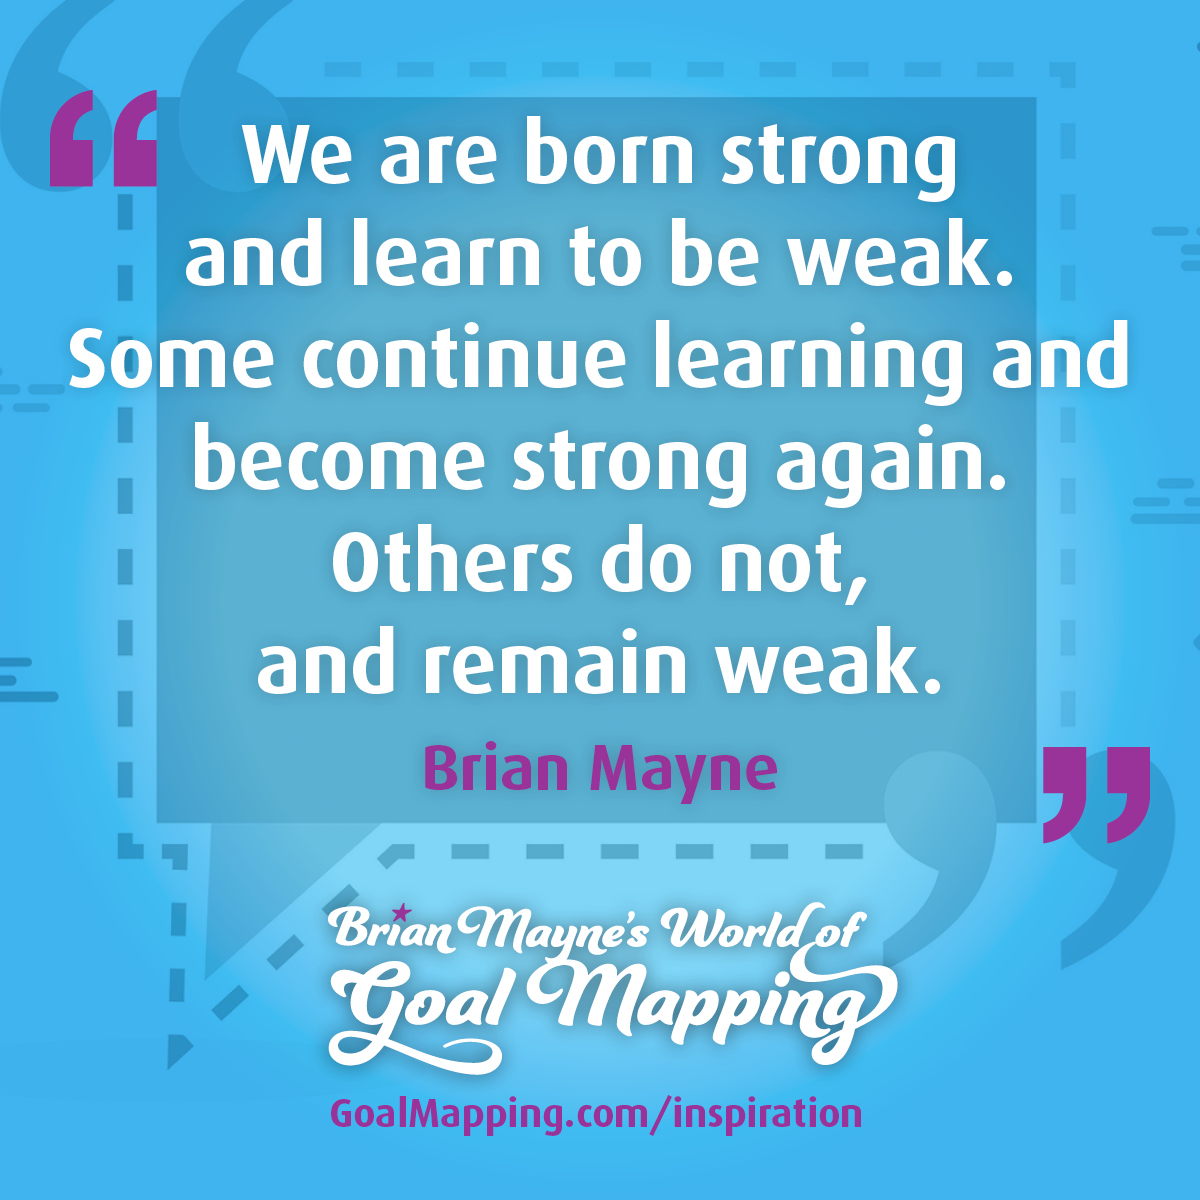 "We are born strong and learn to be weak. Some continue learning and become strong again. Others do not, and remain weak." Brian Mayne